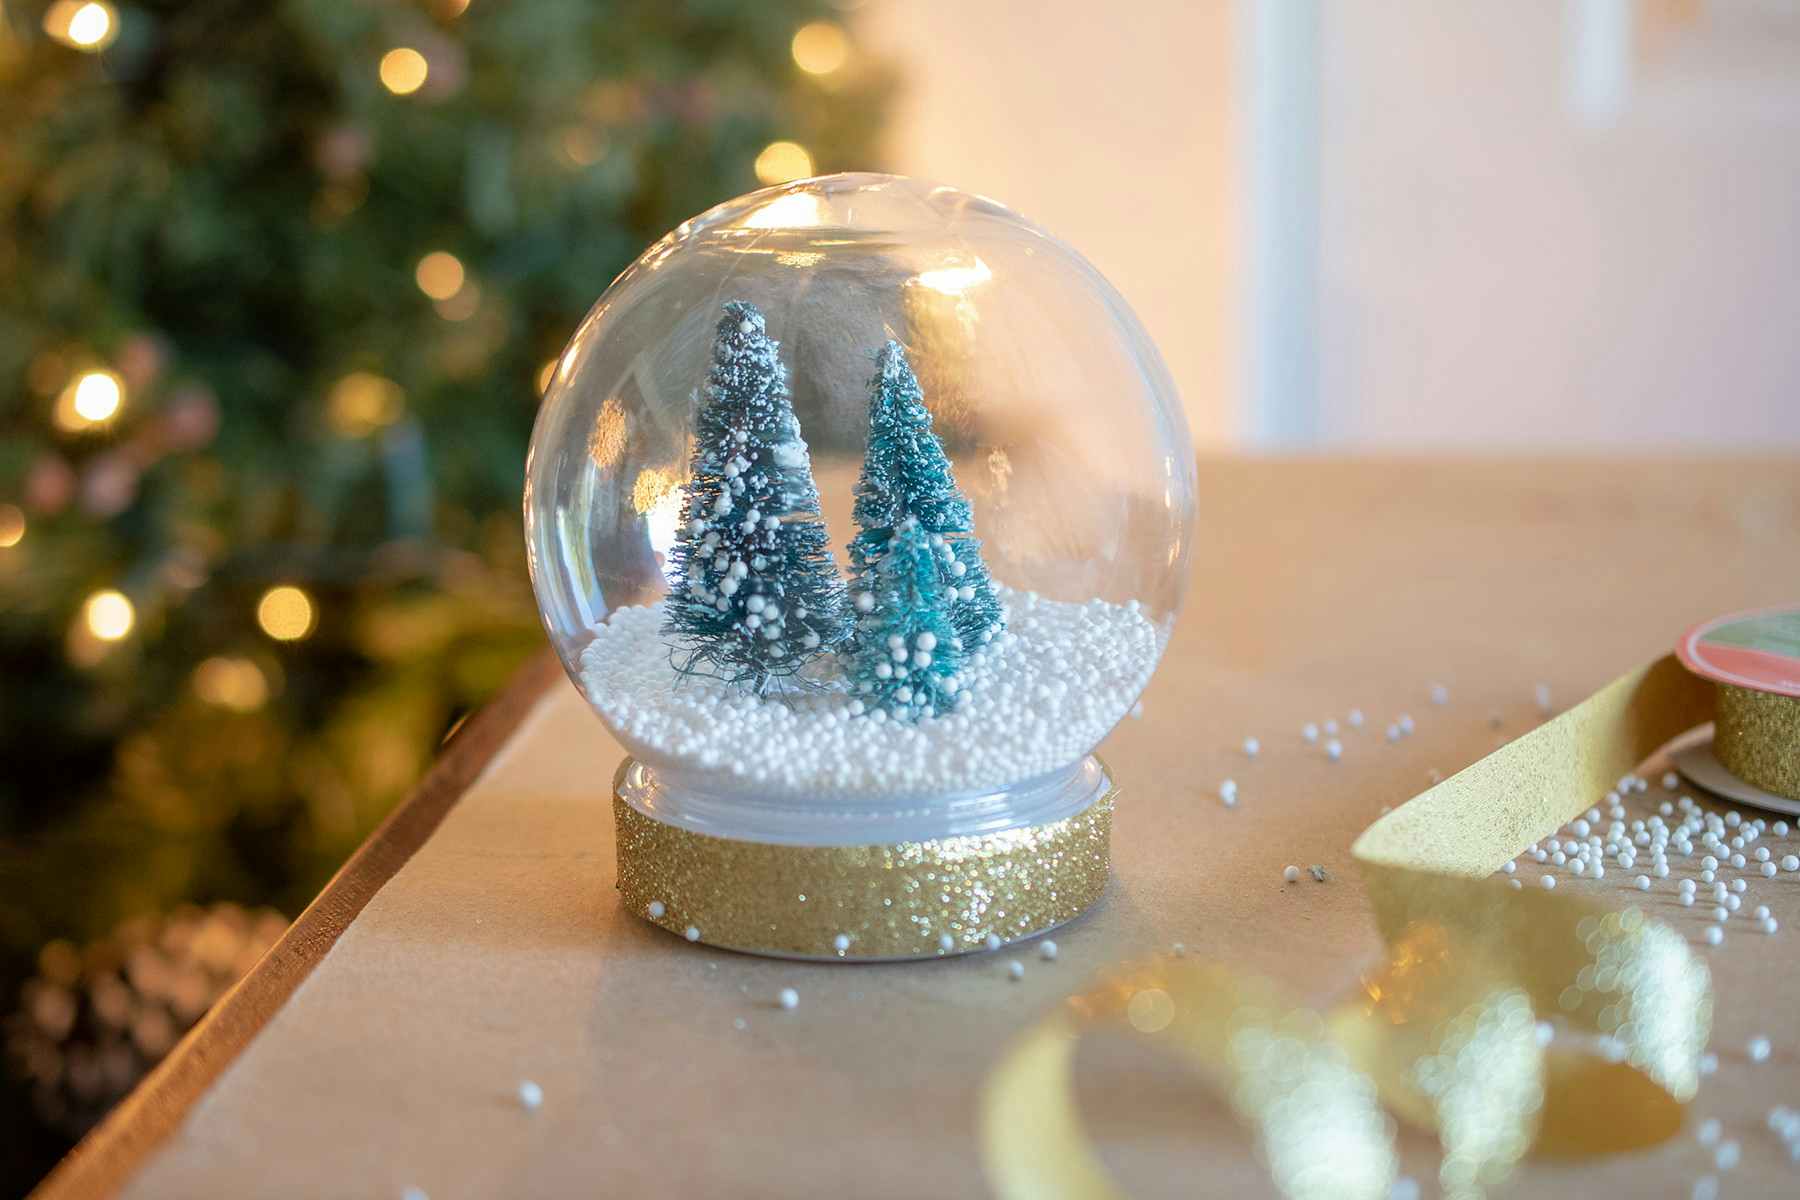 a snowglobe with trees in it